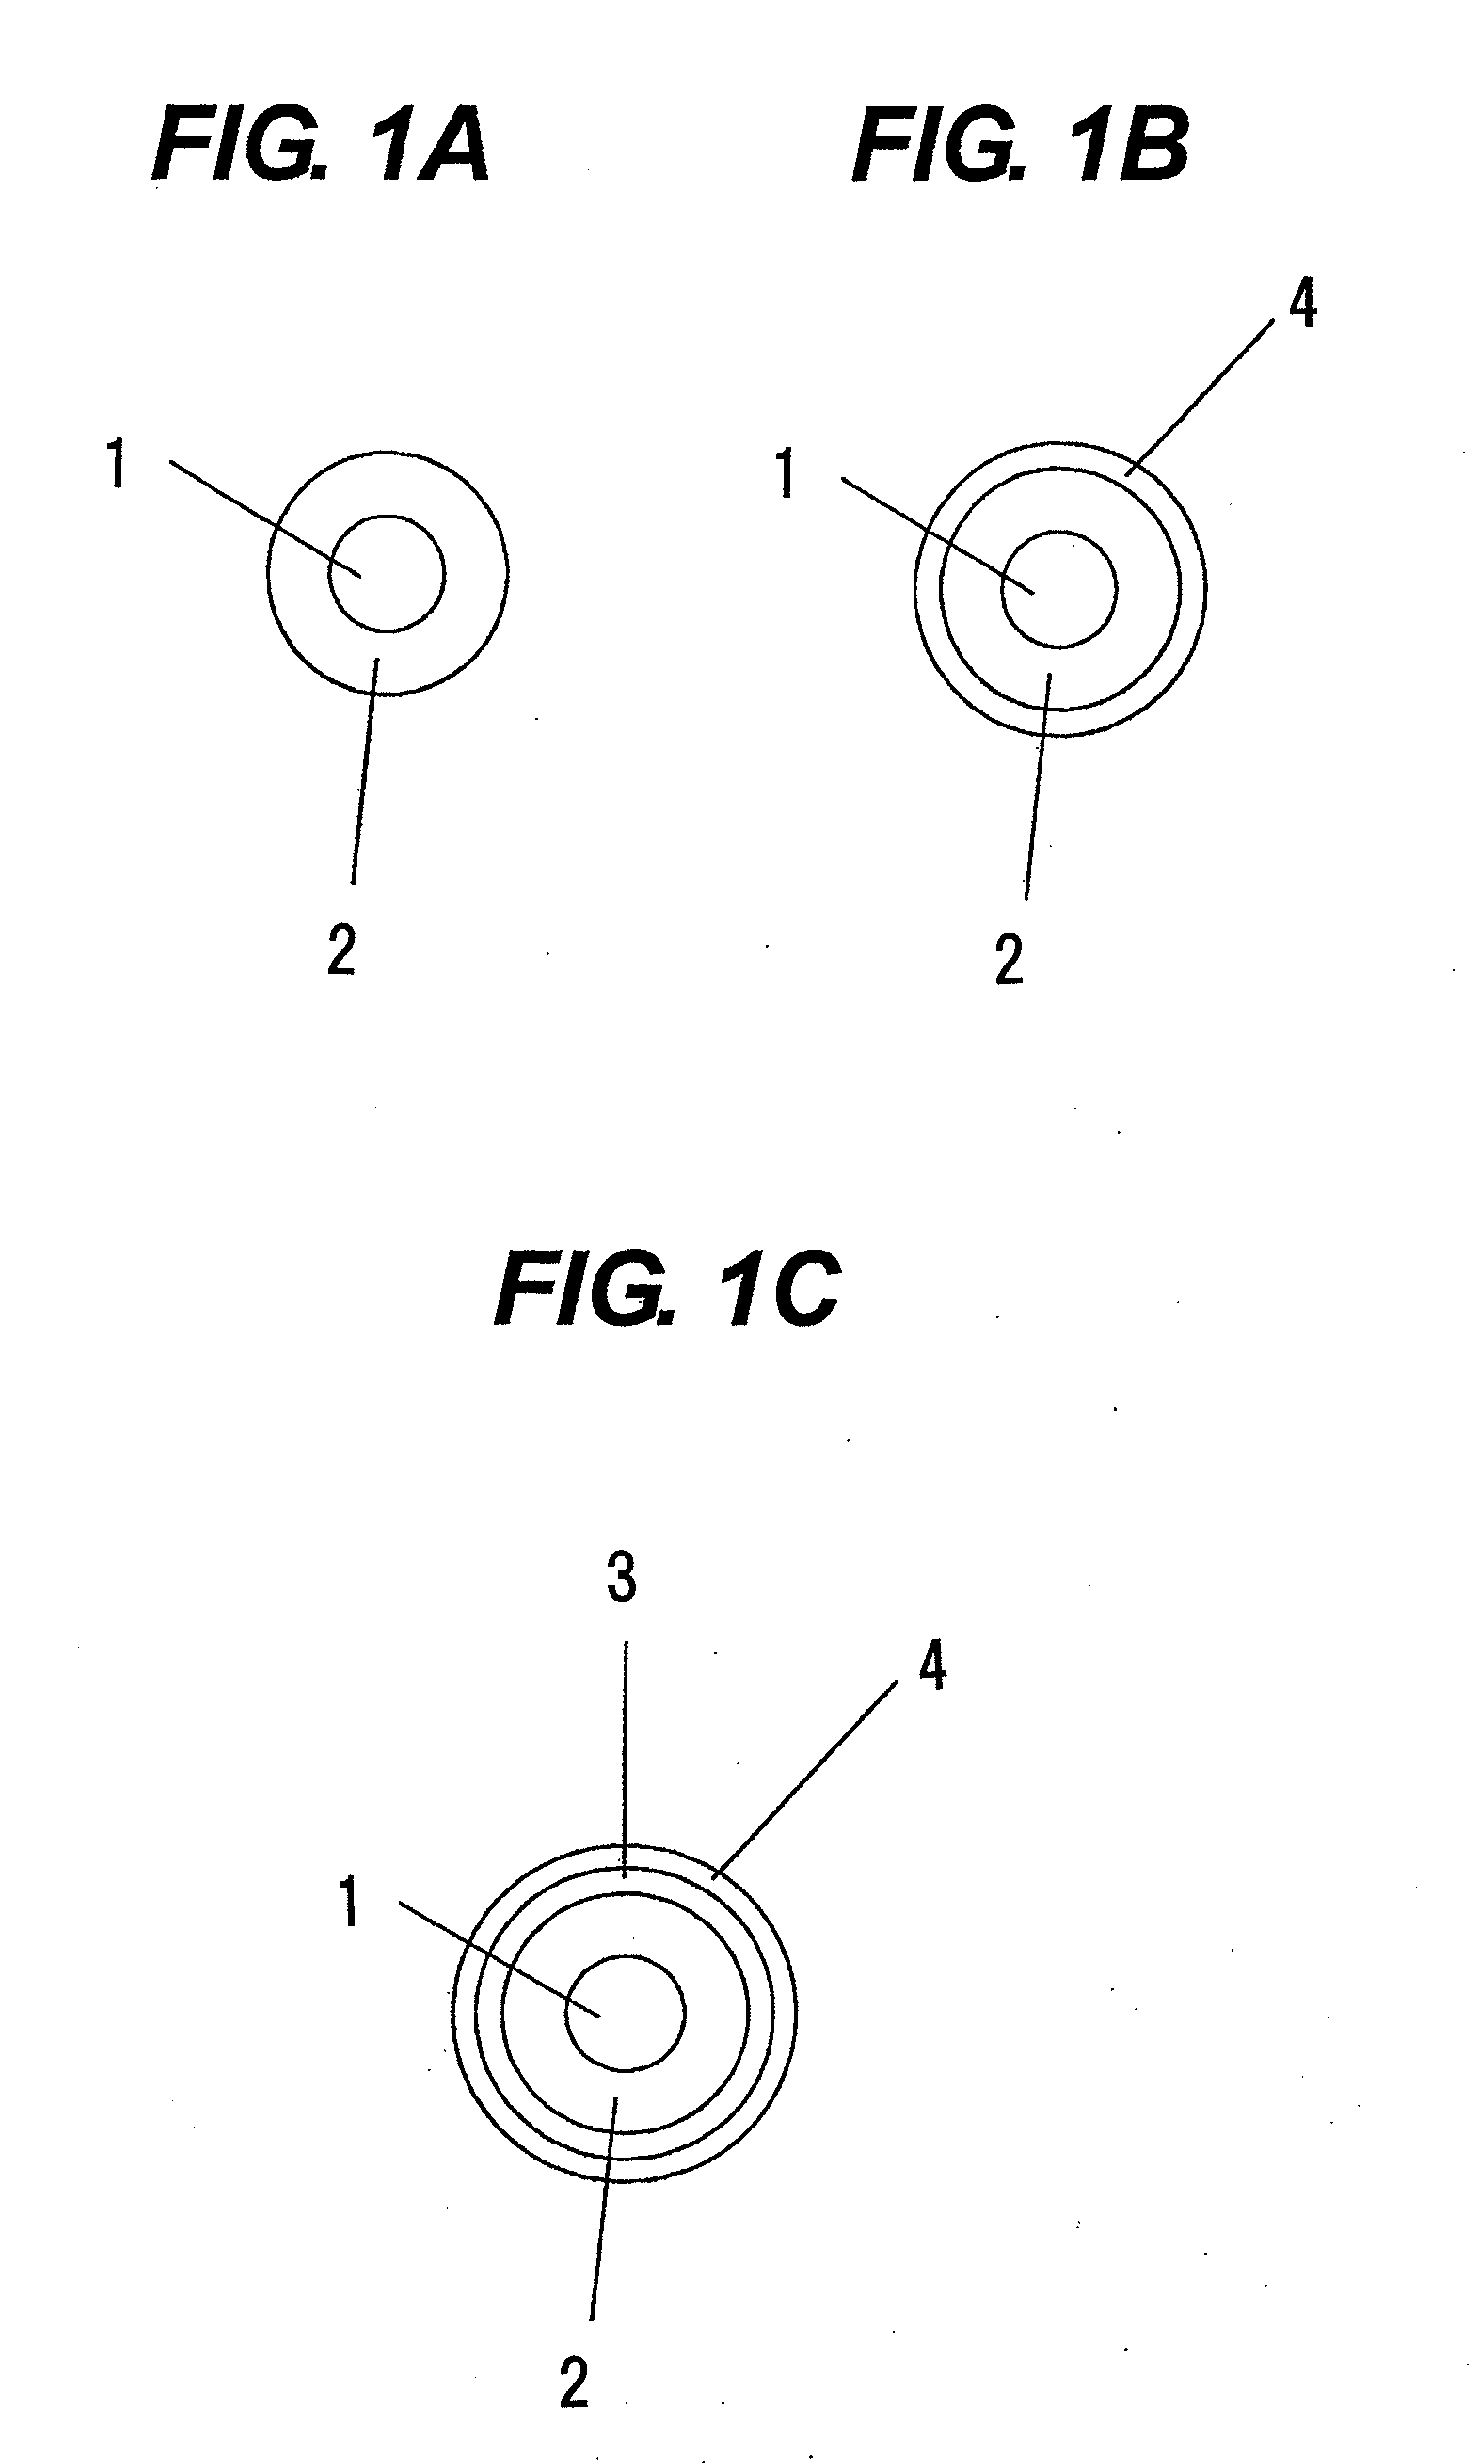 Electrically conductive member, process cartridge and electrophotographic apparatus